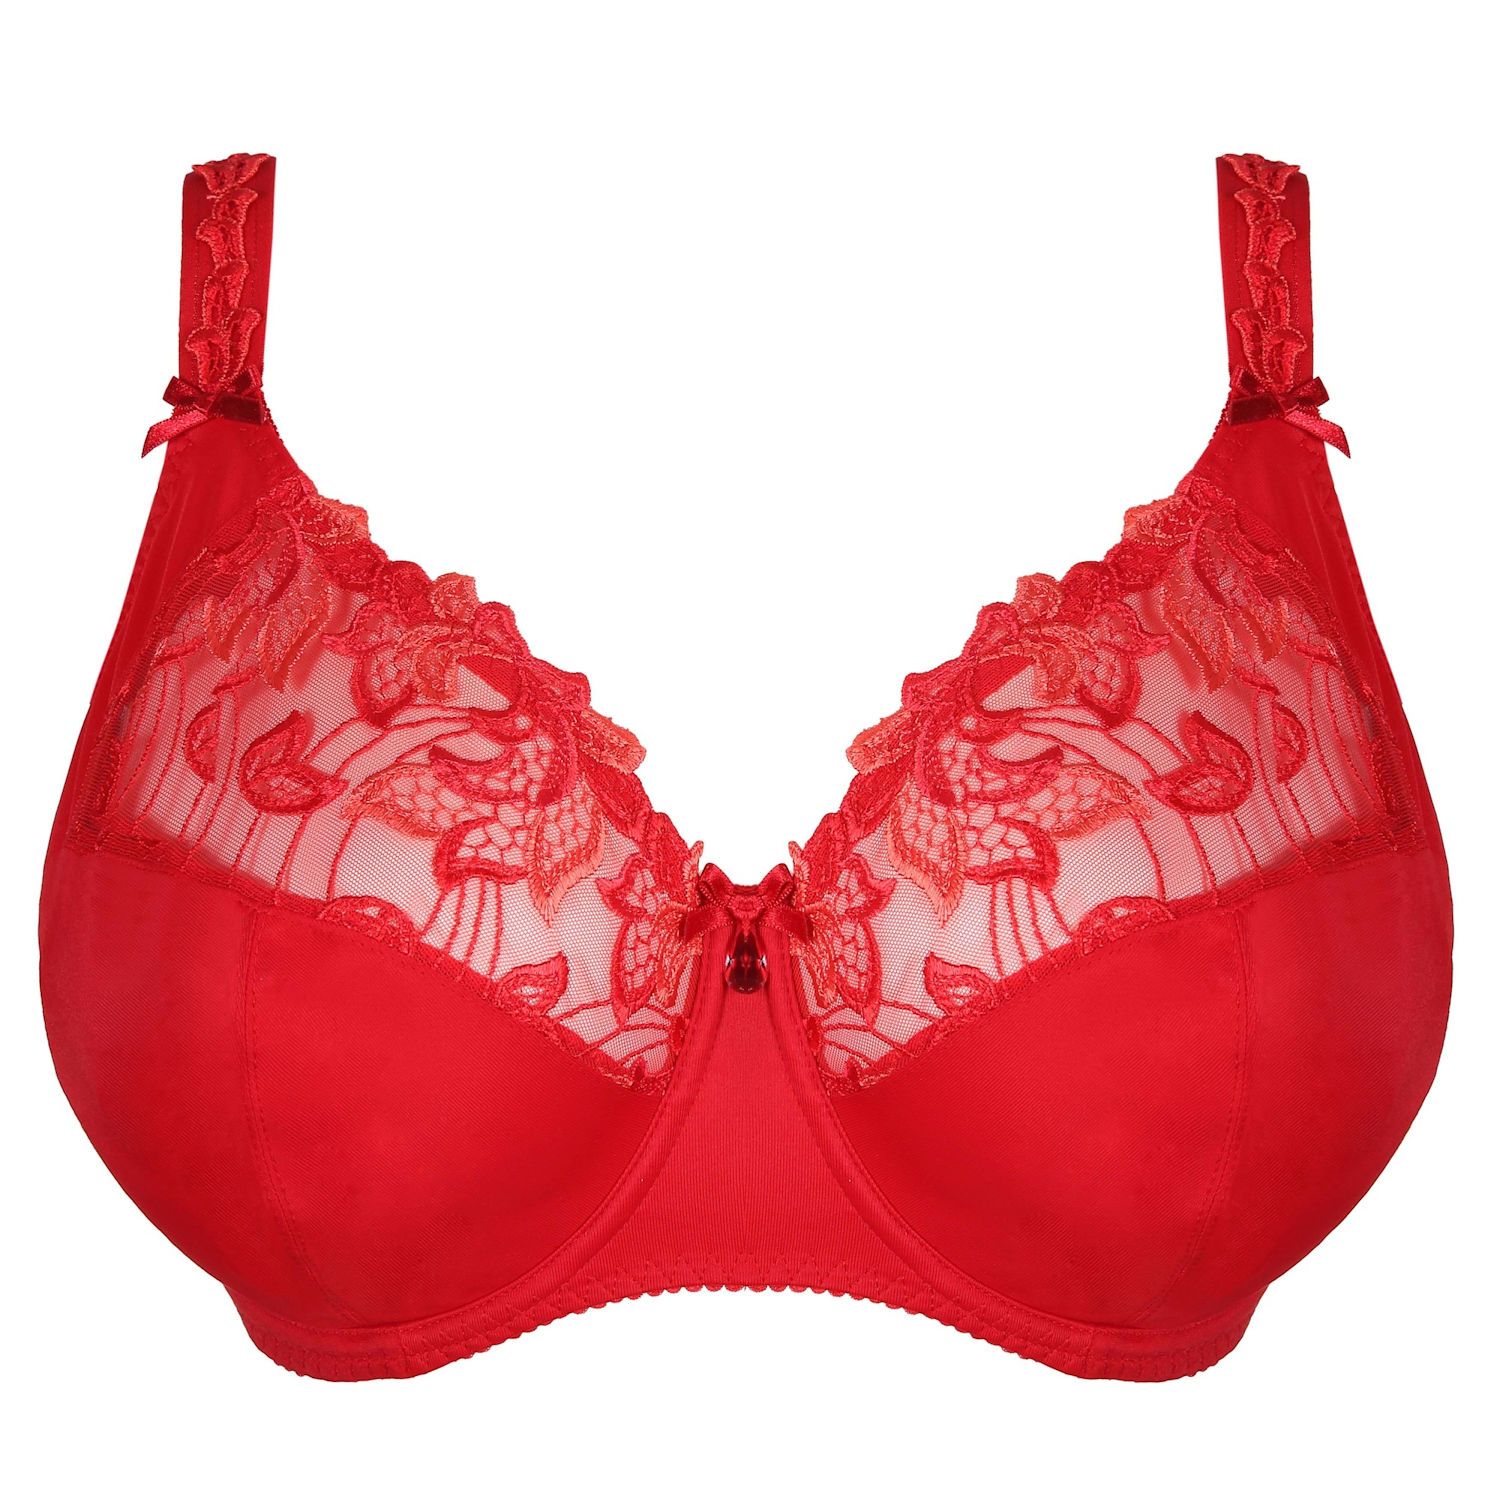 Label teared Bra size it 6c us 40c eu 90cb padded underwired Red